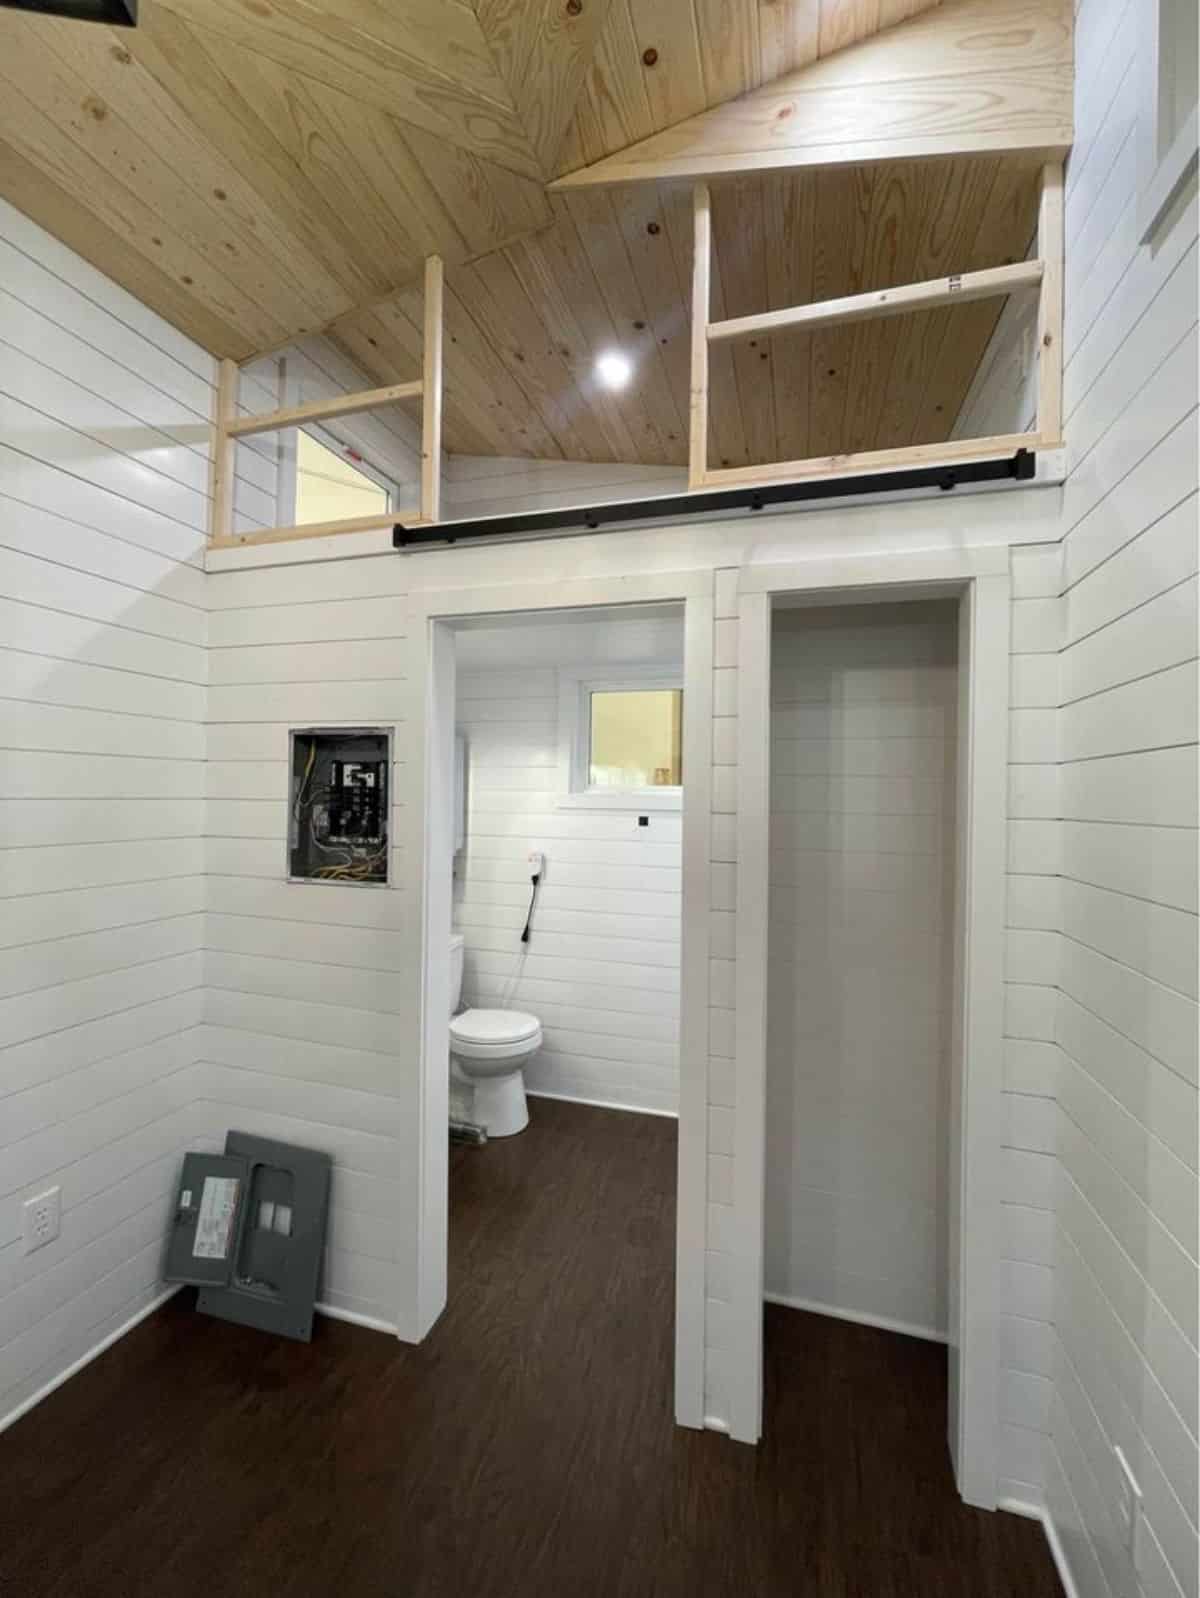 Loft bedroom is above the kitchen and another loft bedroom is above the bathroom